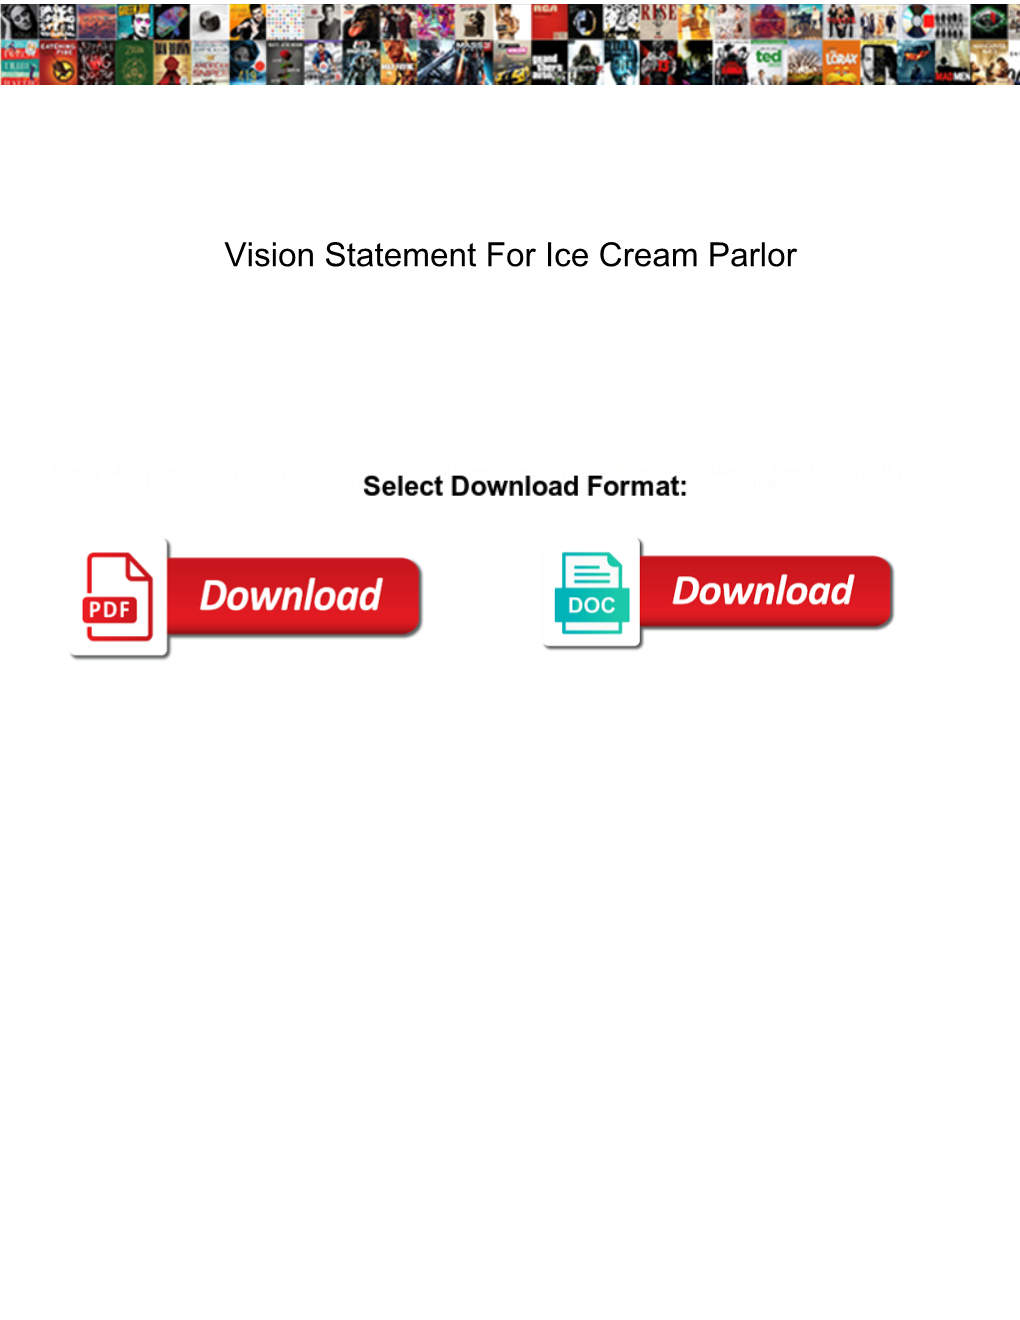 Vision Statement for Ice Cream Parlor